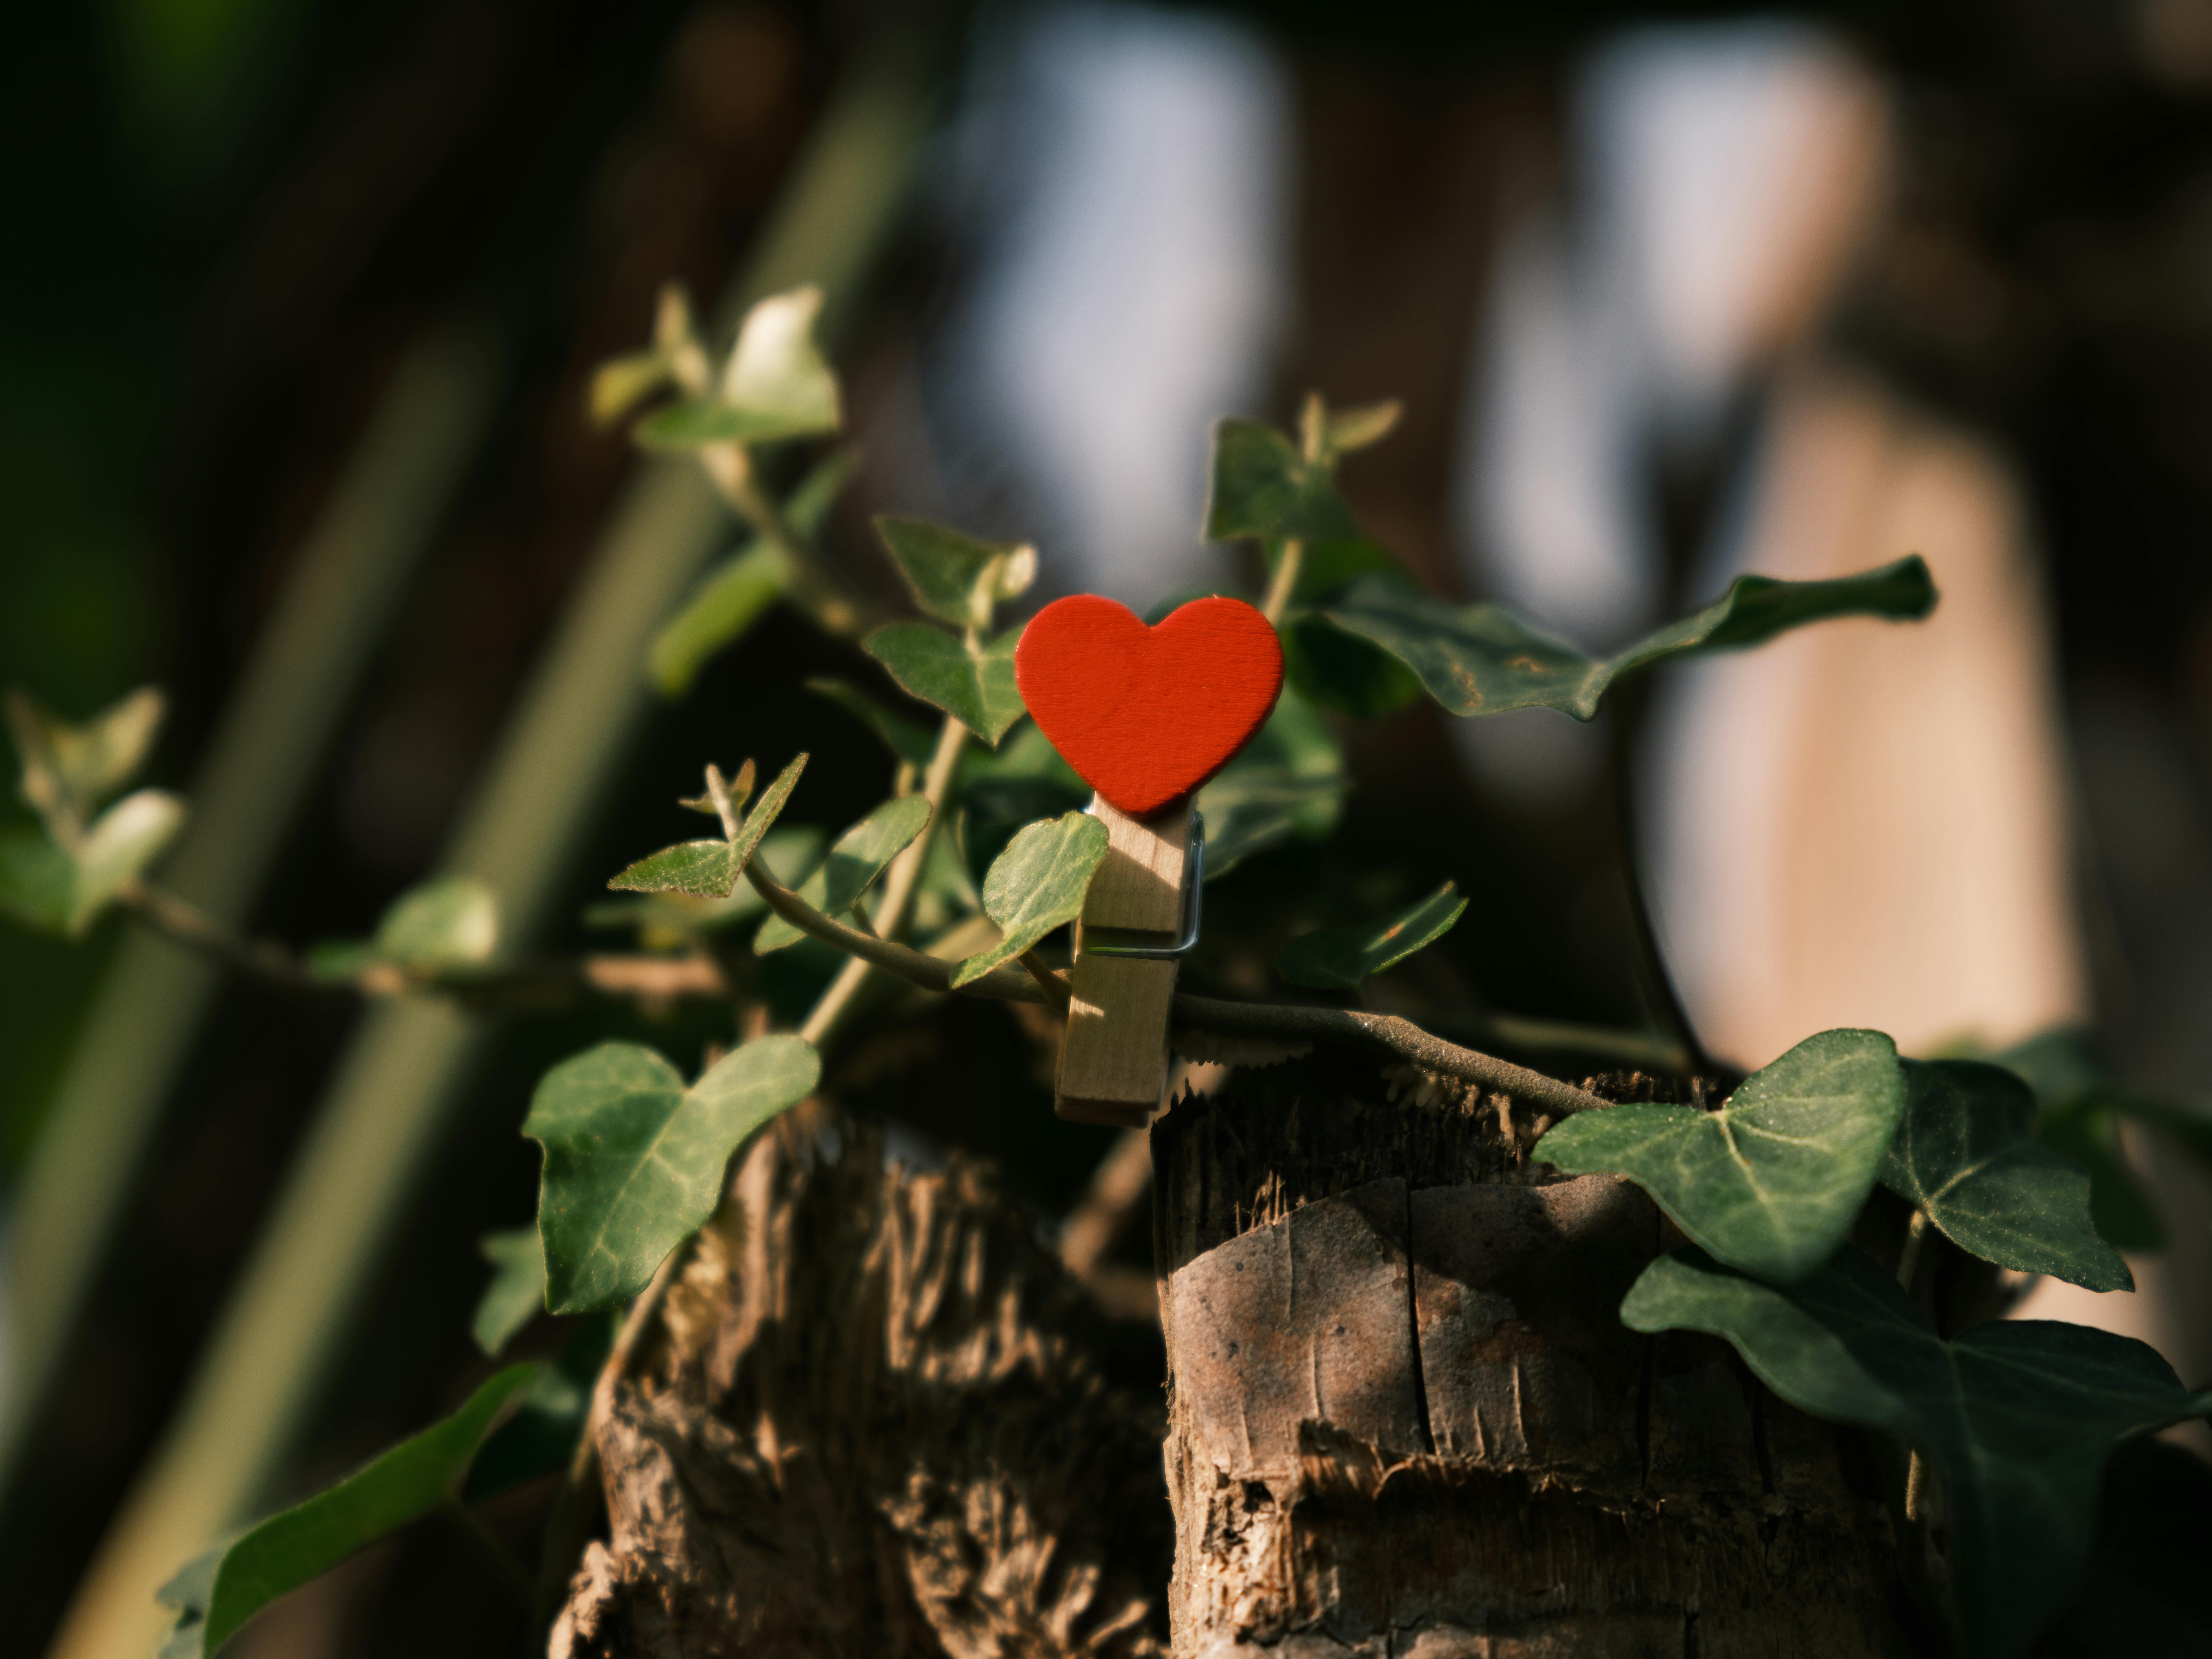 decorative red heart among tree leaves